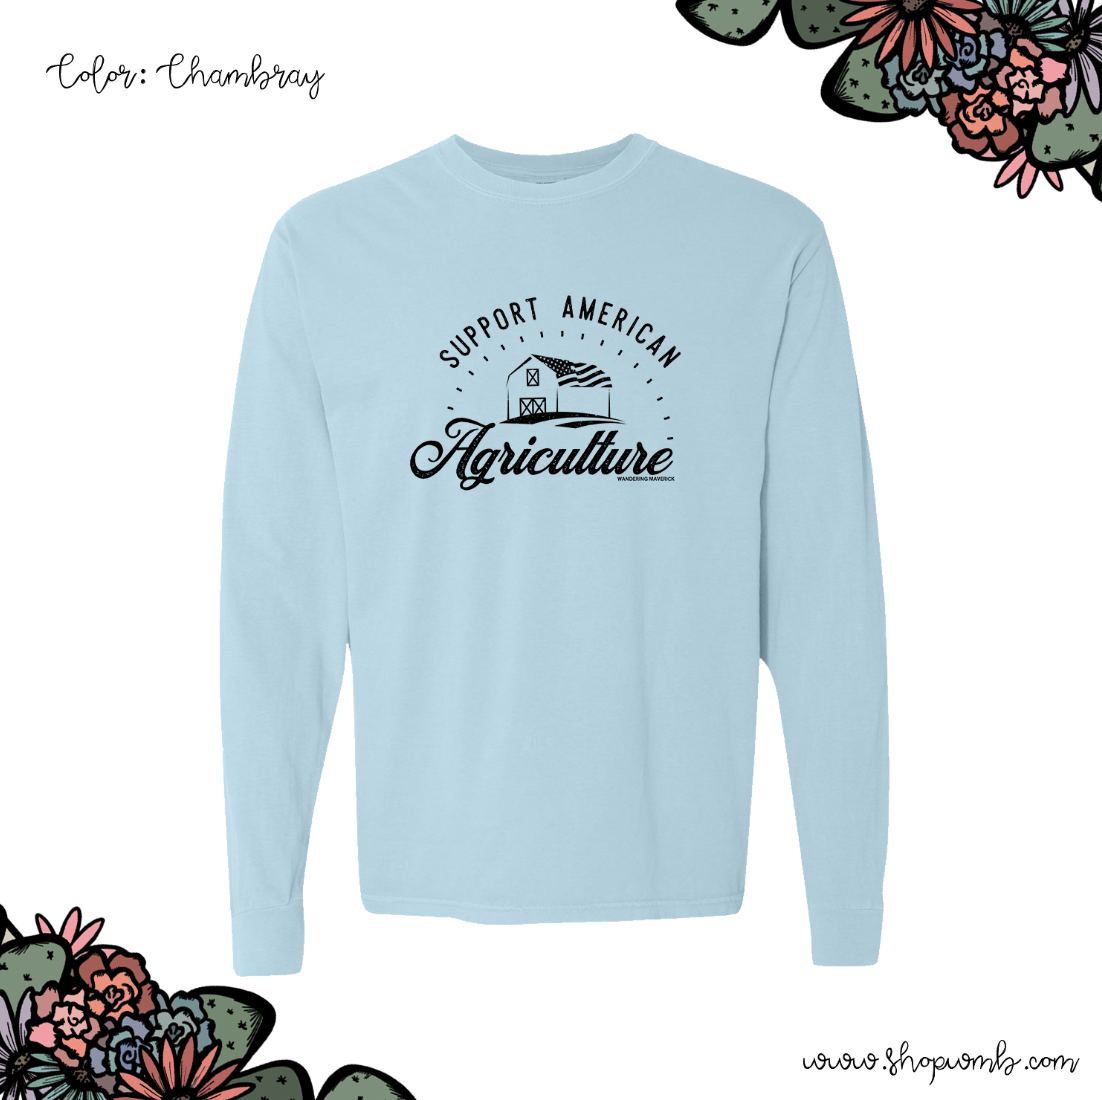 Support American Agriculture LONG SLEEVE T-Shirt (S-3XL) - Multiple Colors!